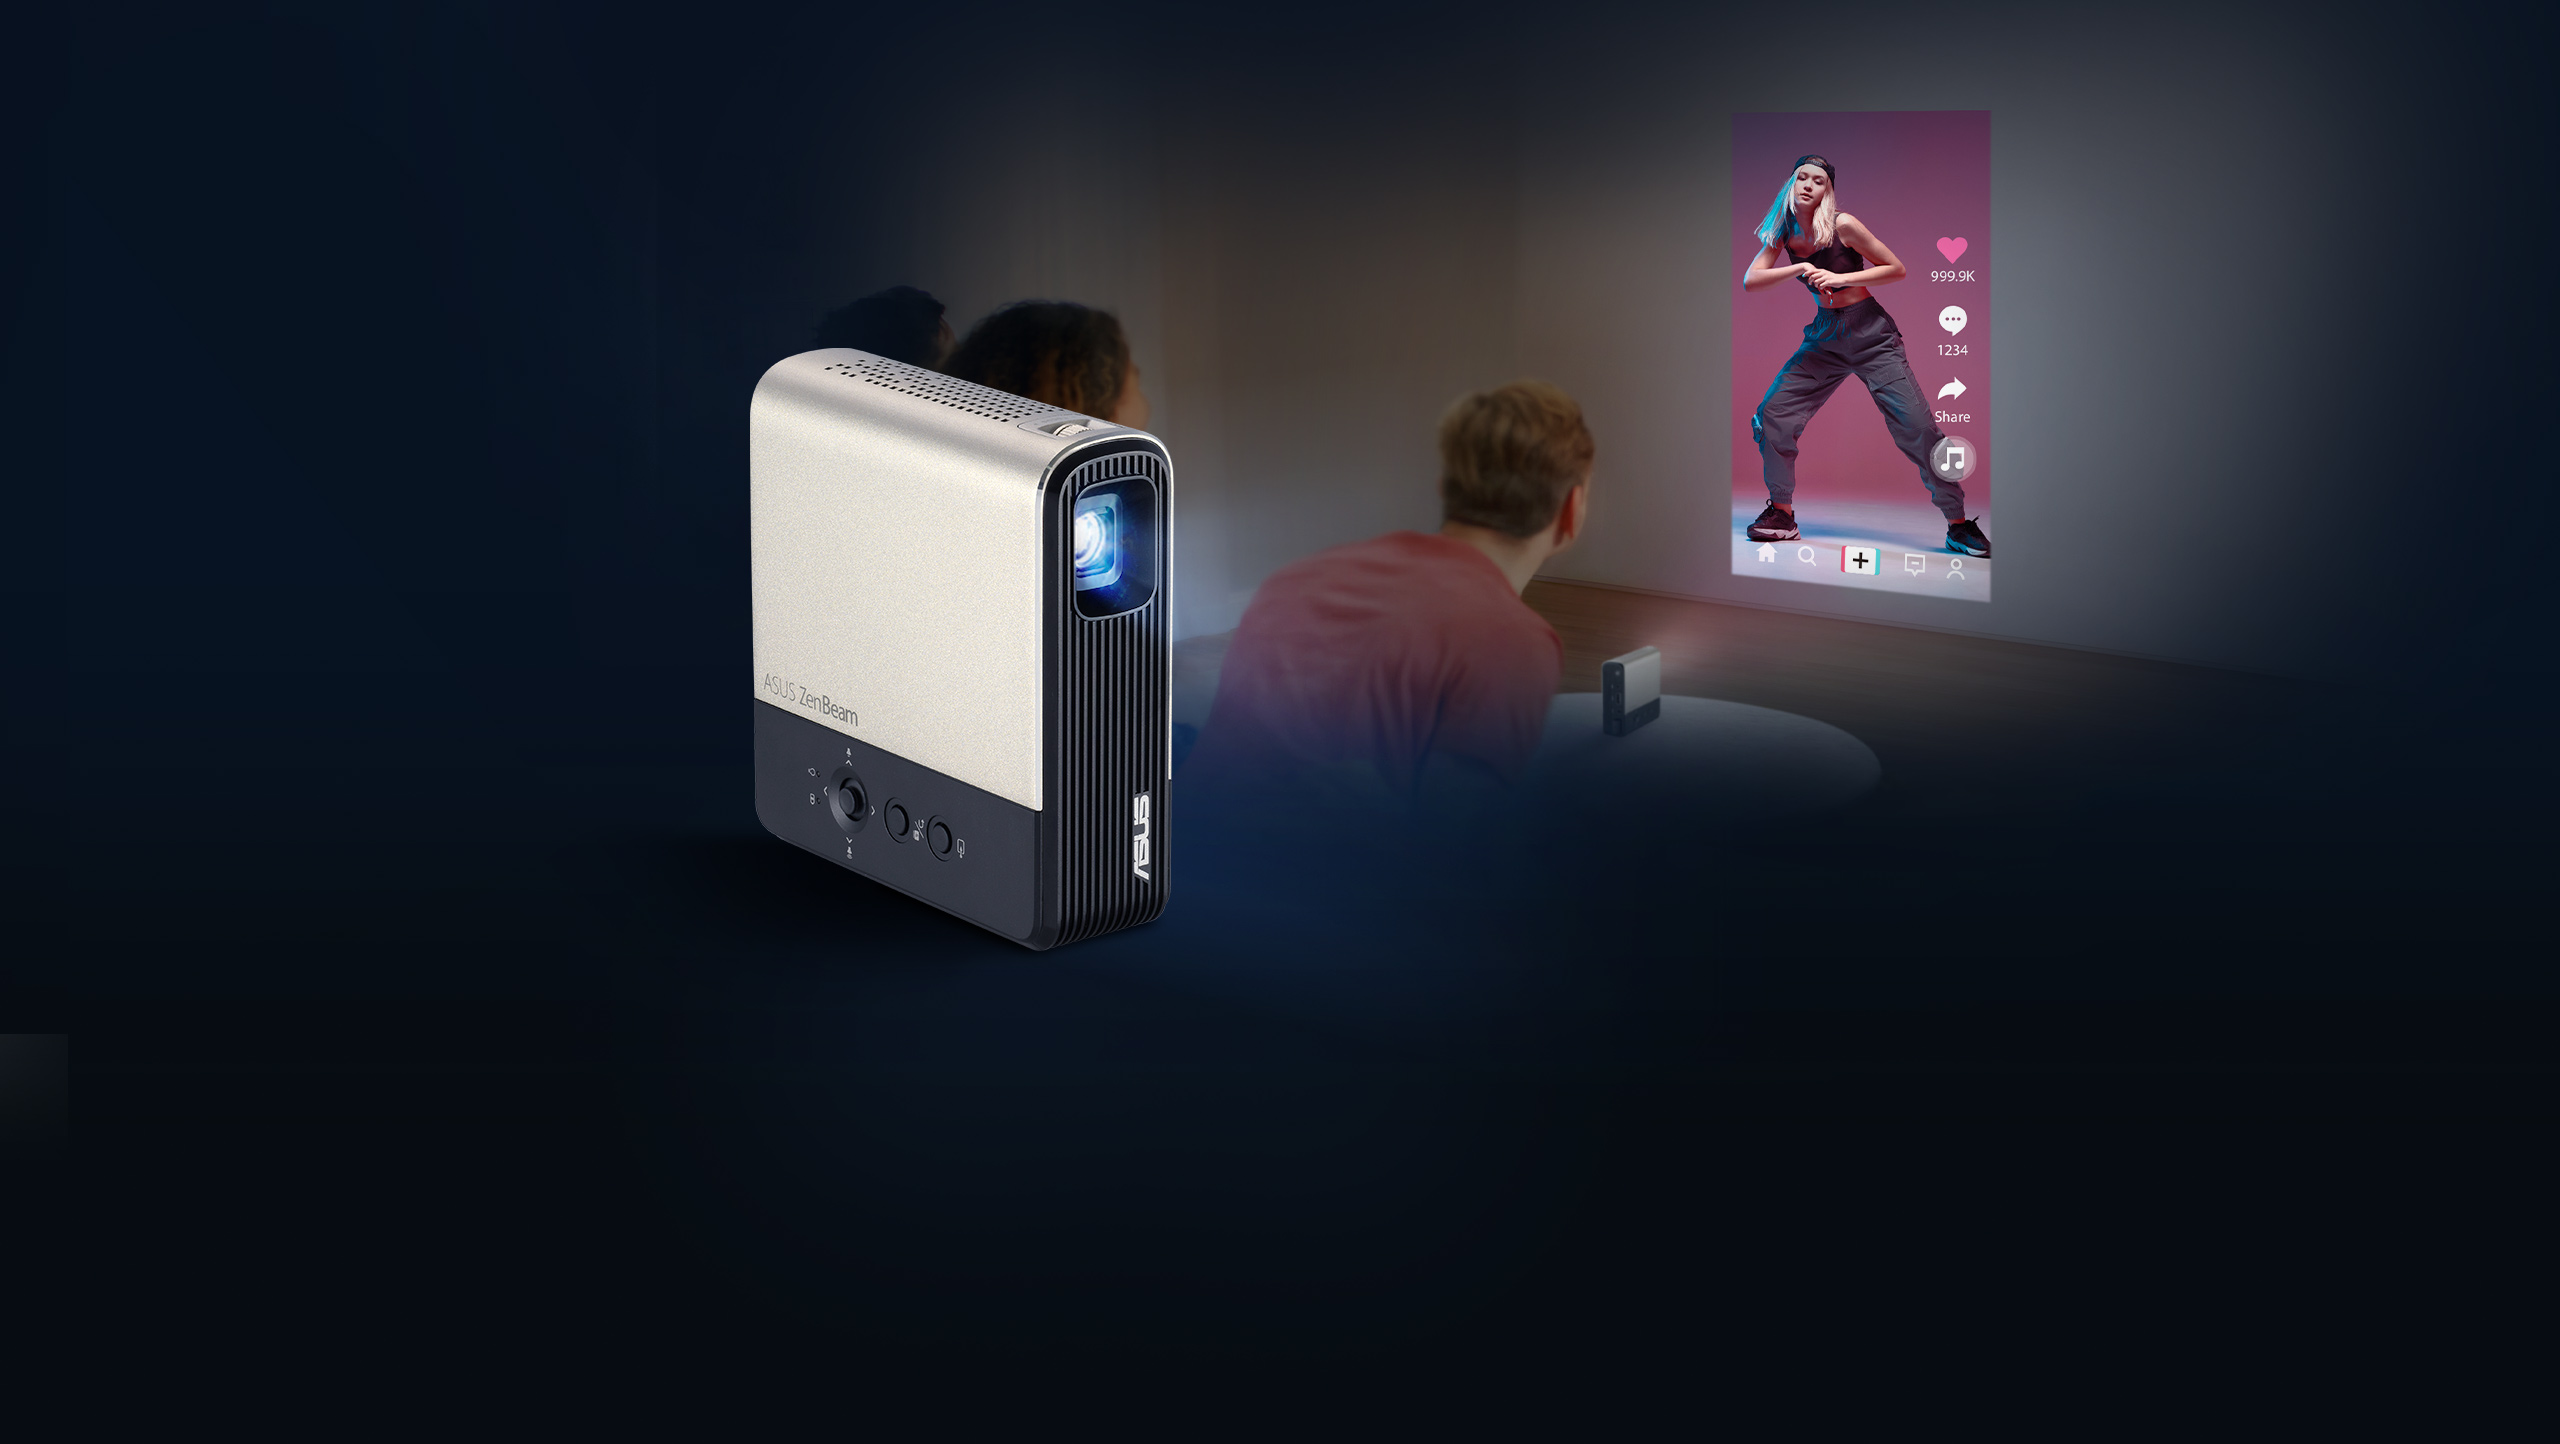 ASUS ZenBeam E2 is compact wireless mini projector with Auto Portrait mode for vertical social media content mirroring